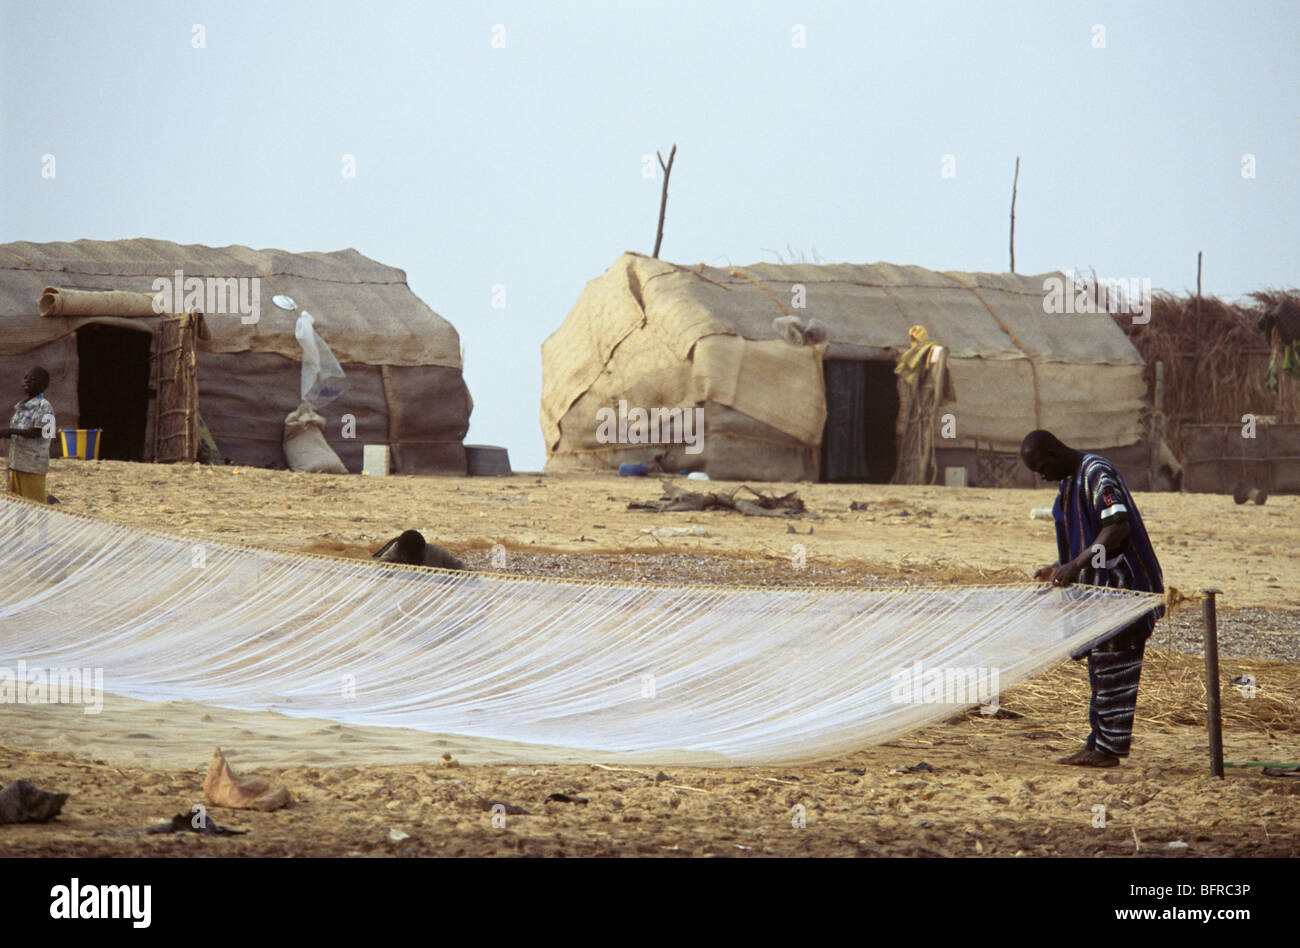 Bozo fisherman checks his nets on the banks of the Niger River with traditional cottages in the background Stock Photo